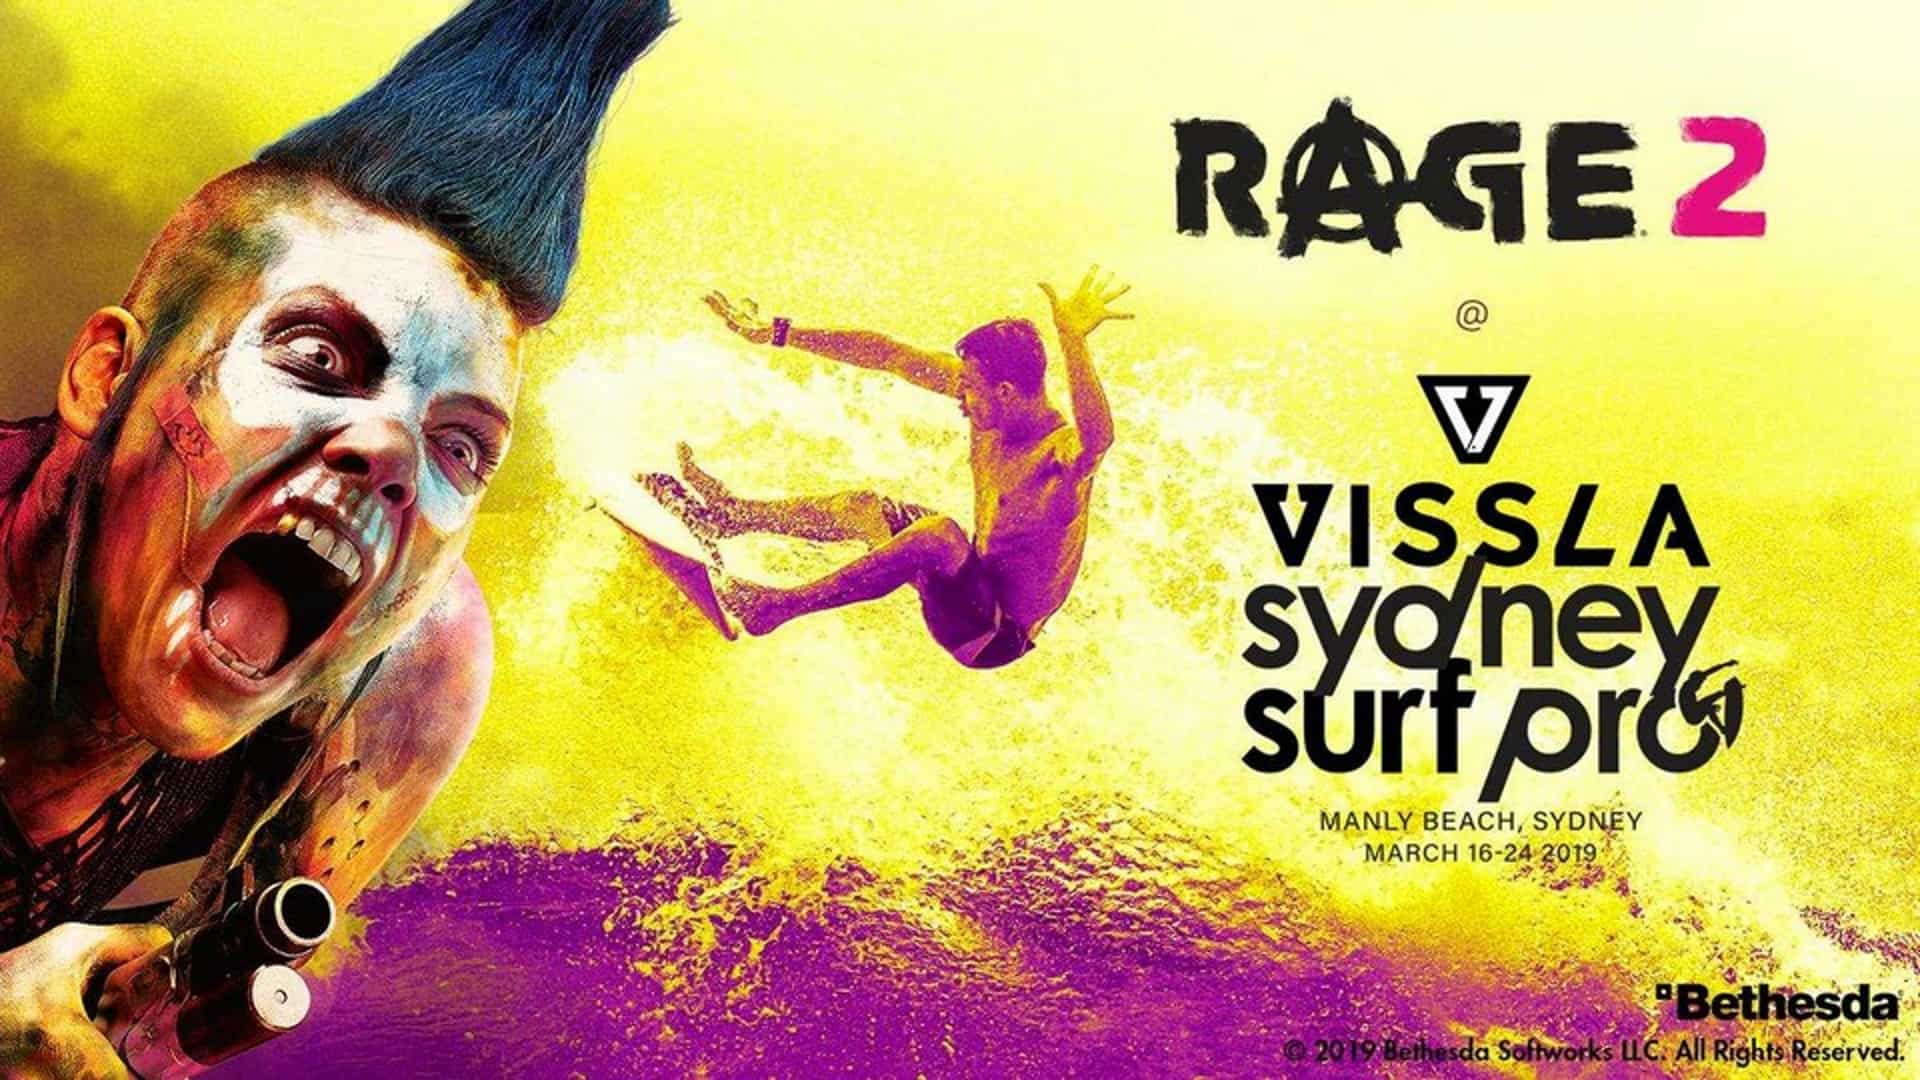 RAGE 2 Is Coming To Vissla Sydney Surf Pro This Year